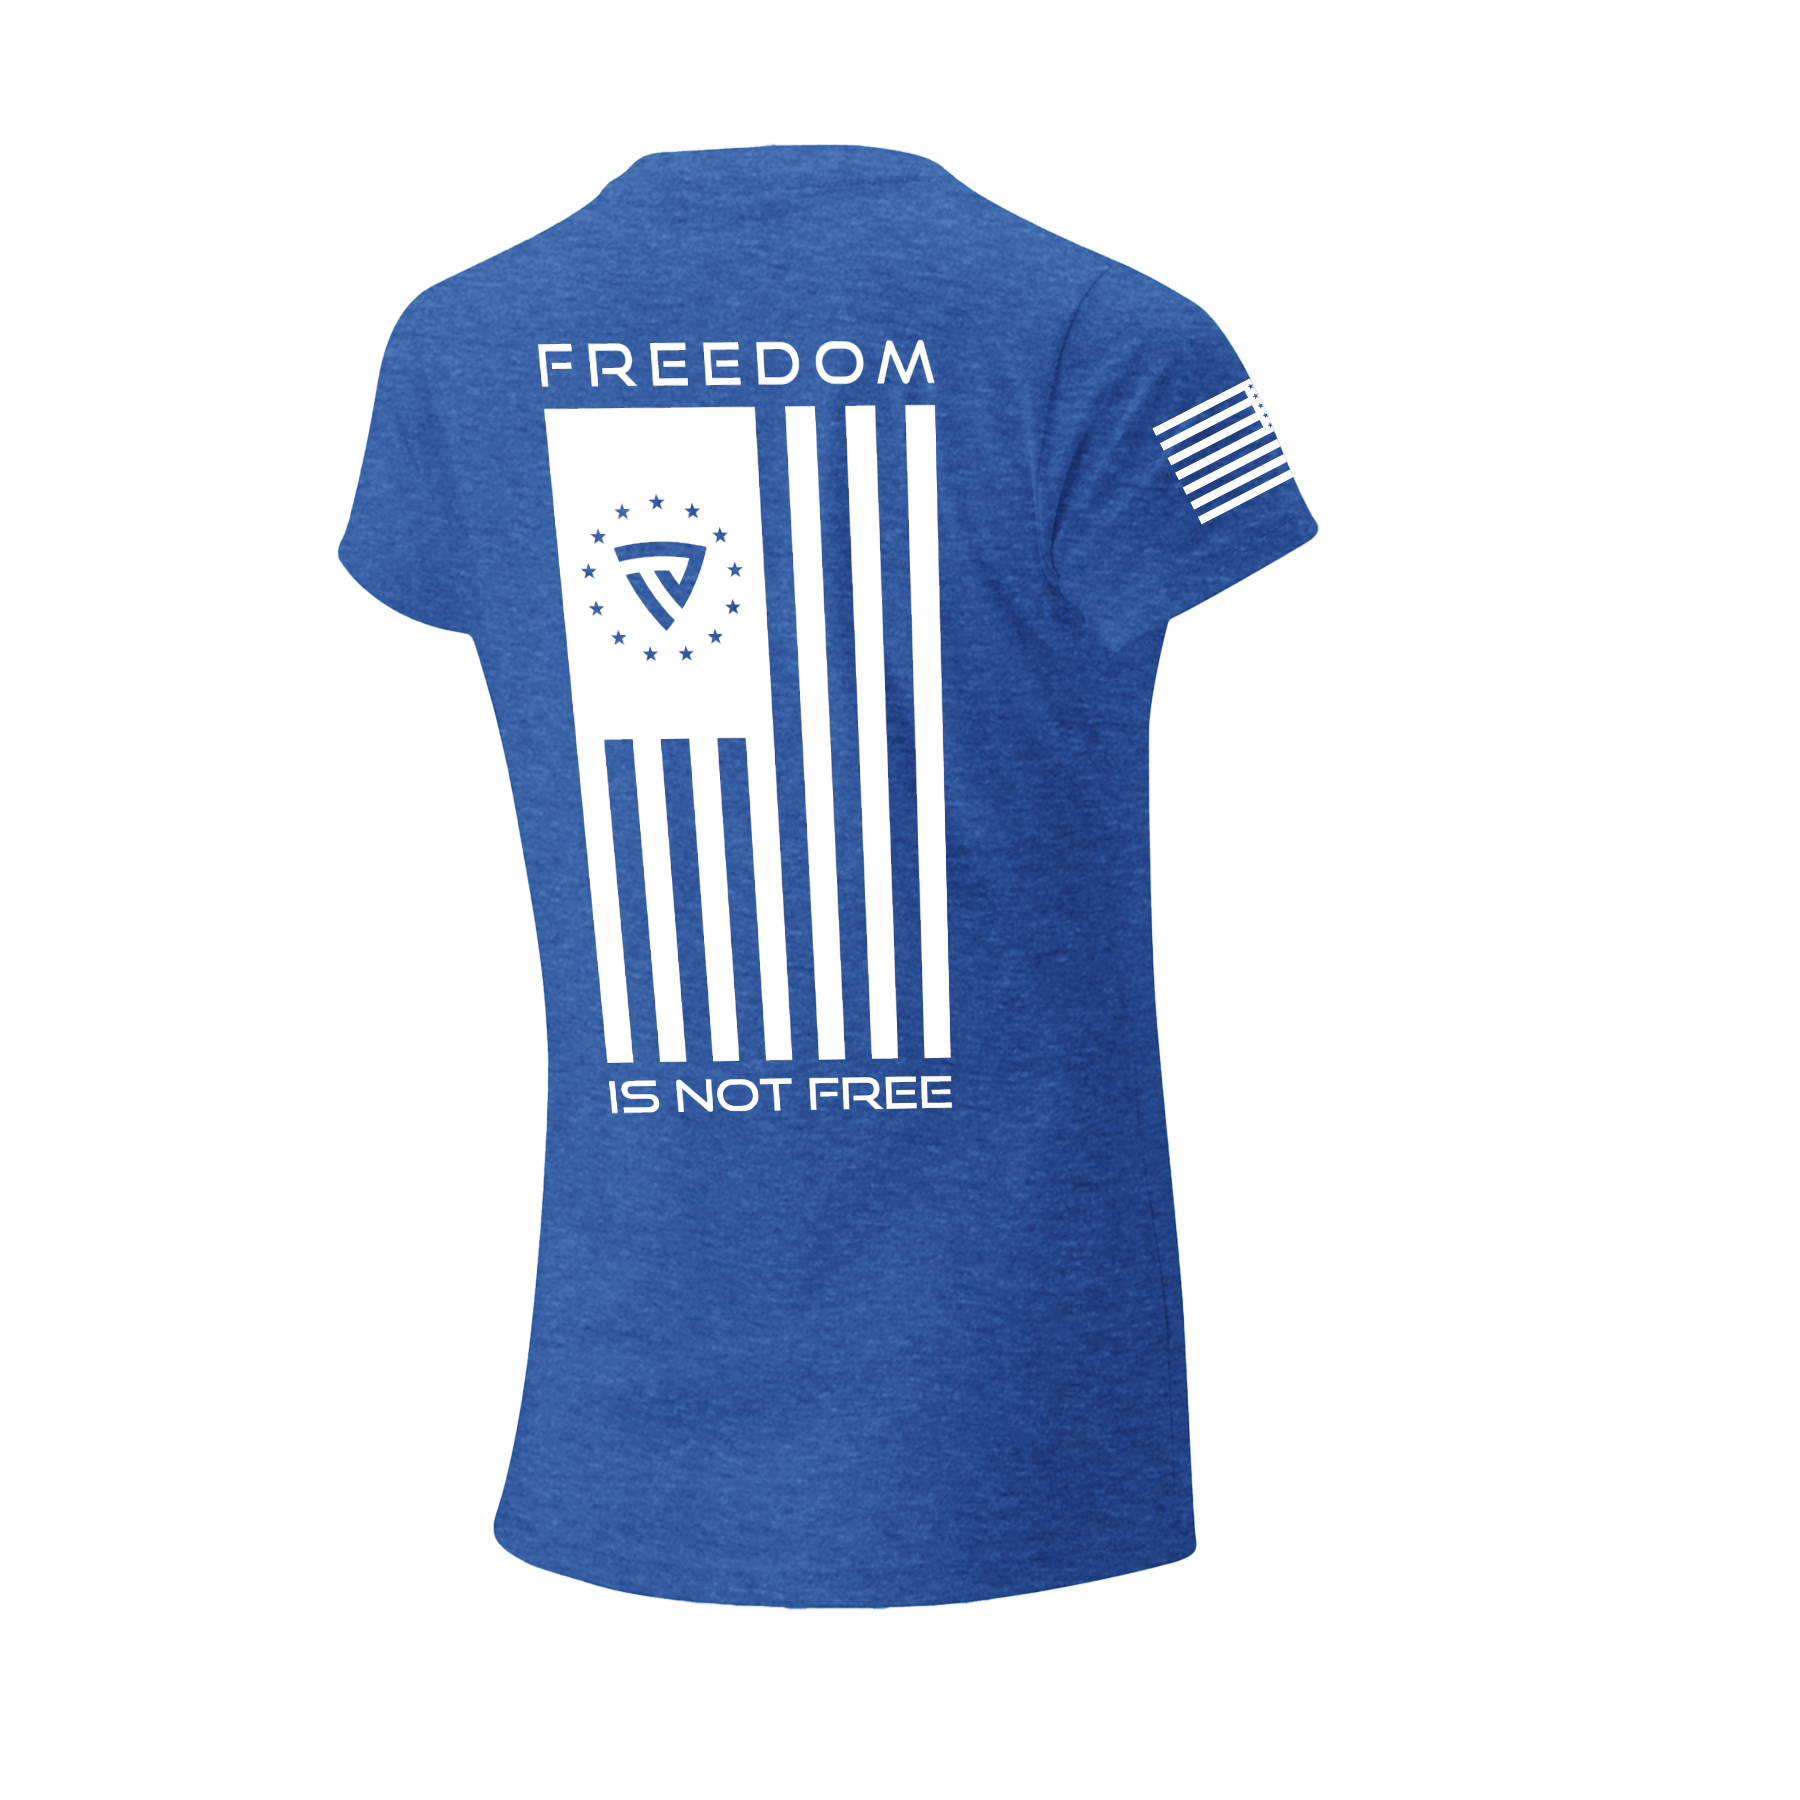 Women's Freedom Is Not Free X PS20 Tee